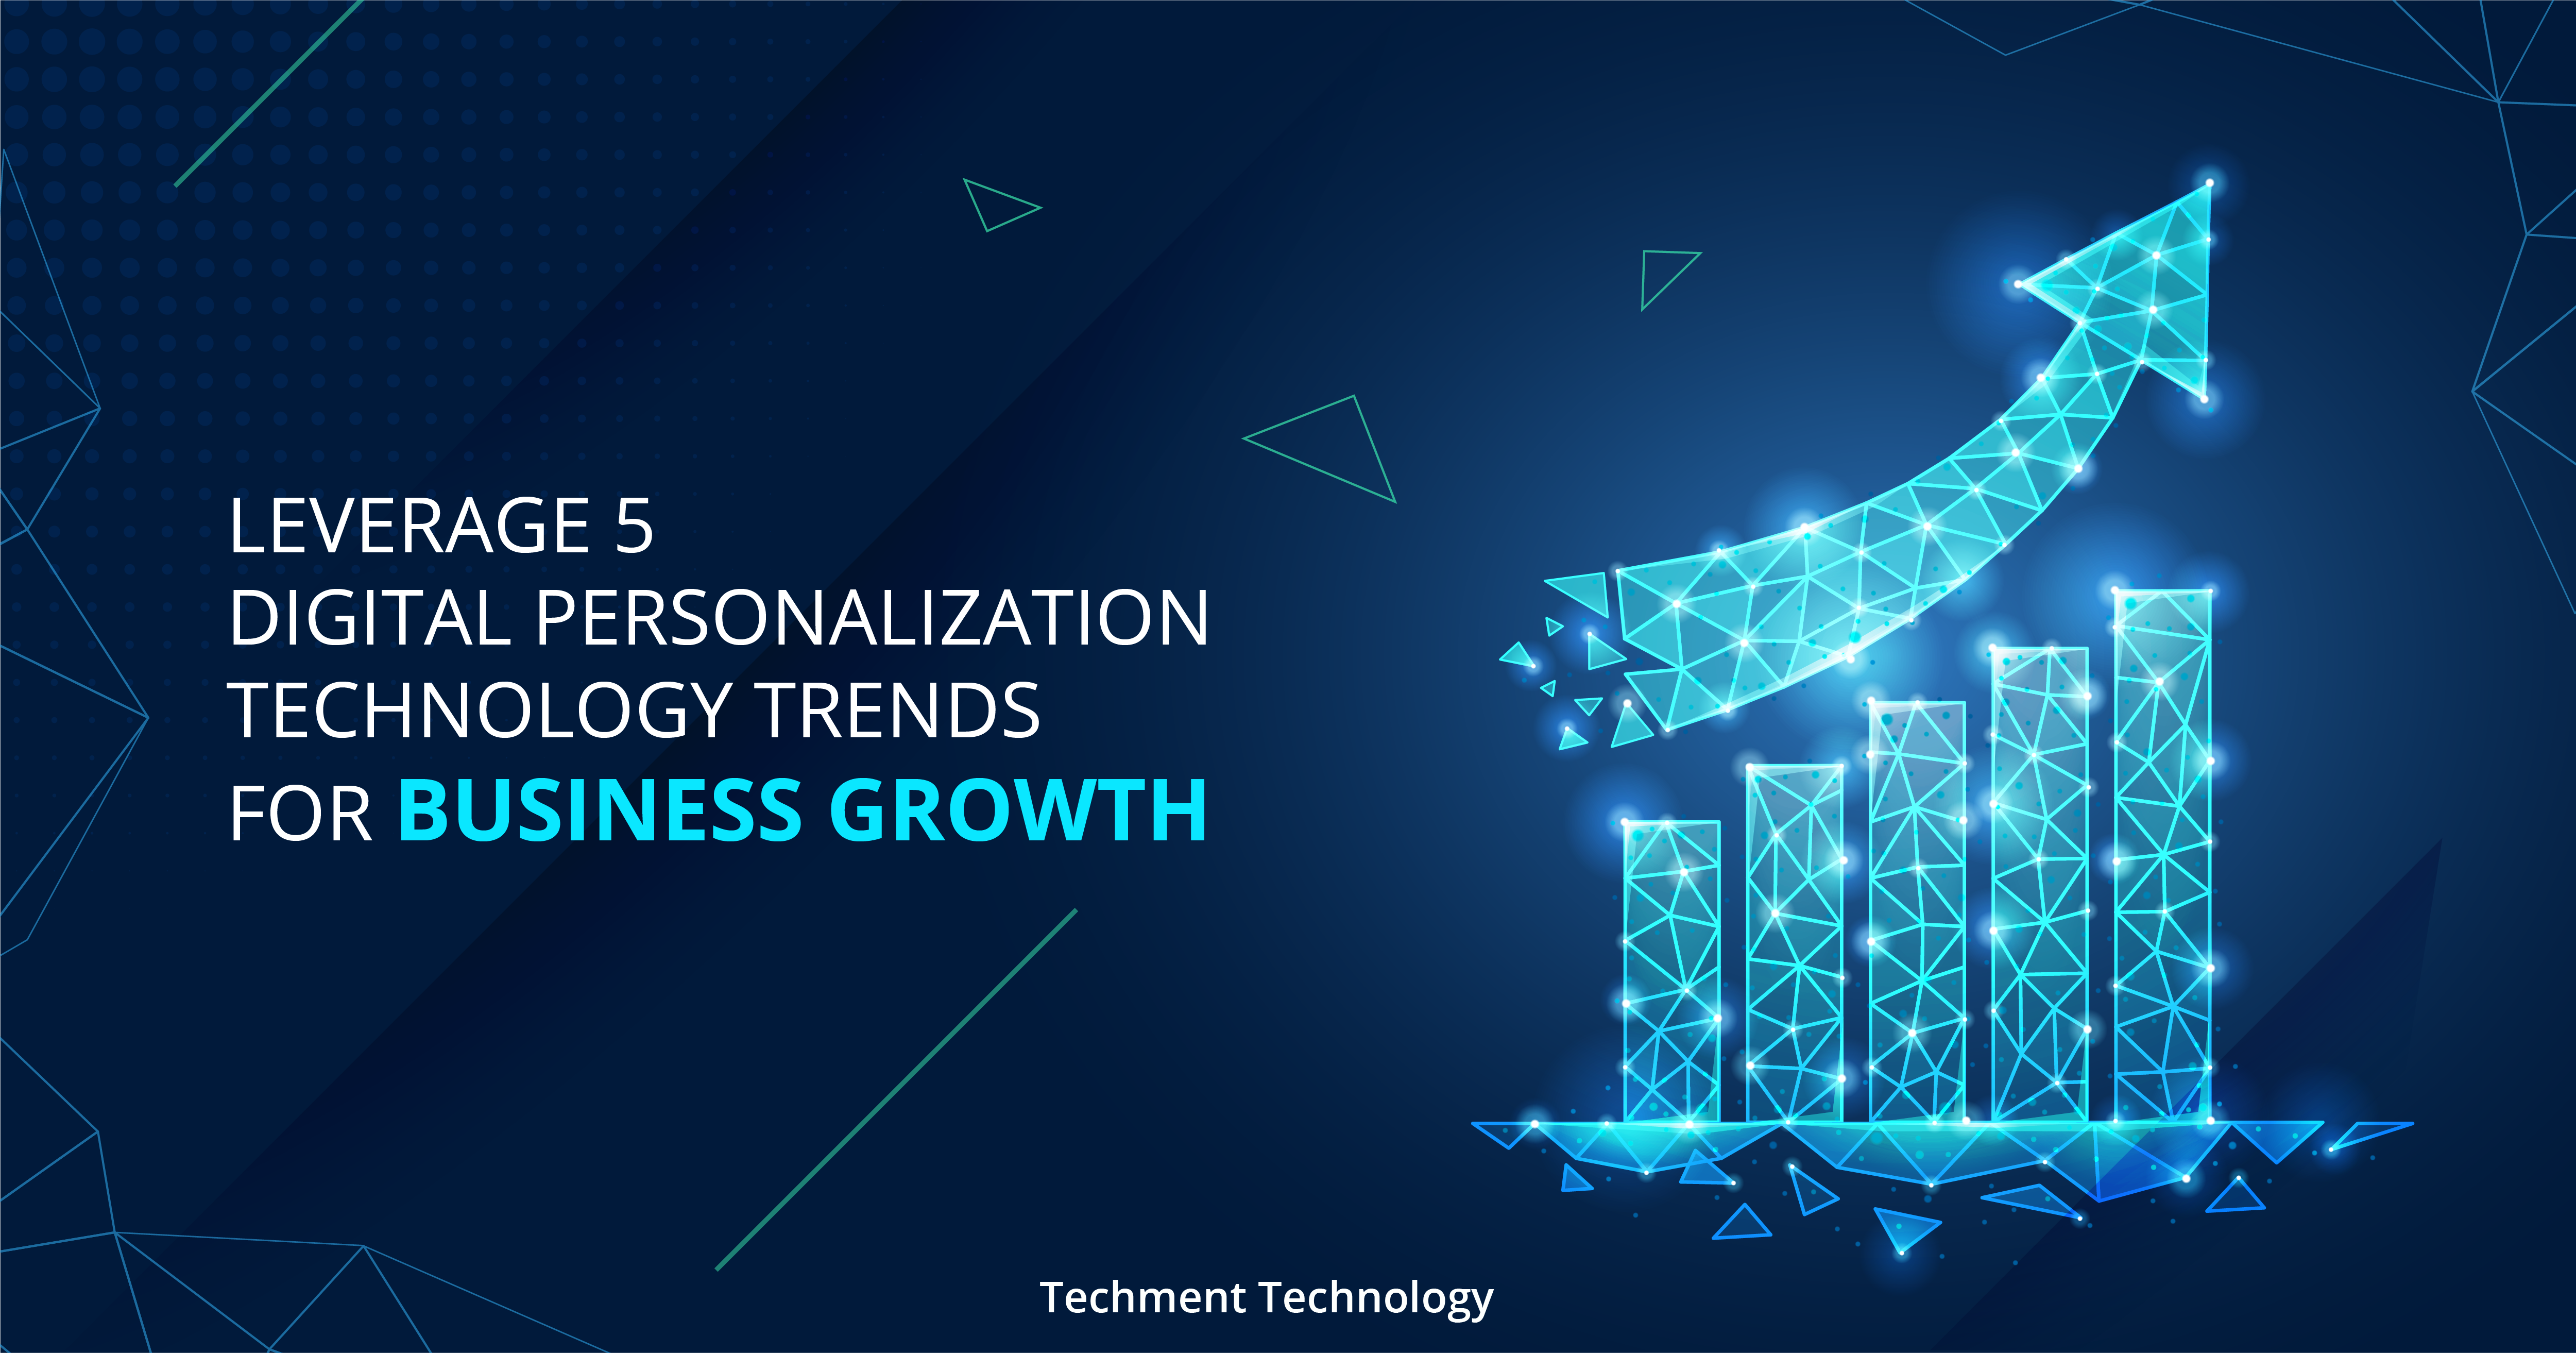 Leverage 5 Digital Personalization Technology Trends for Business Growth